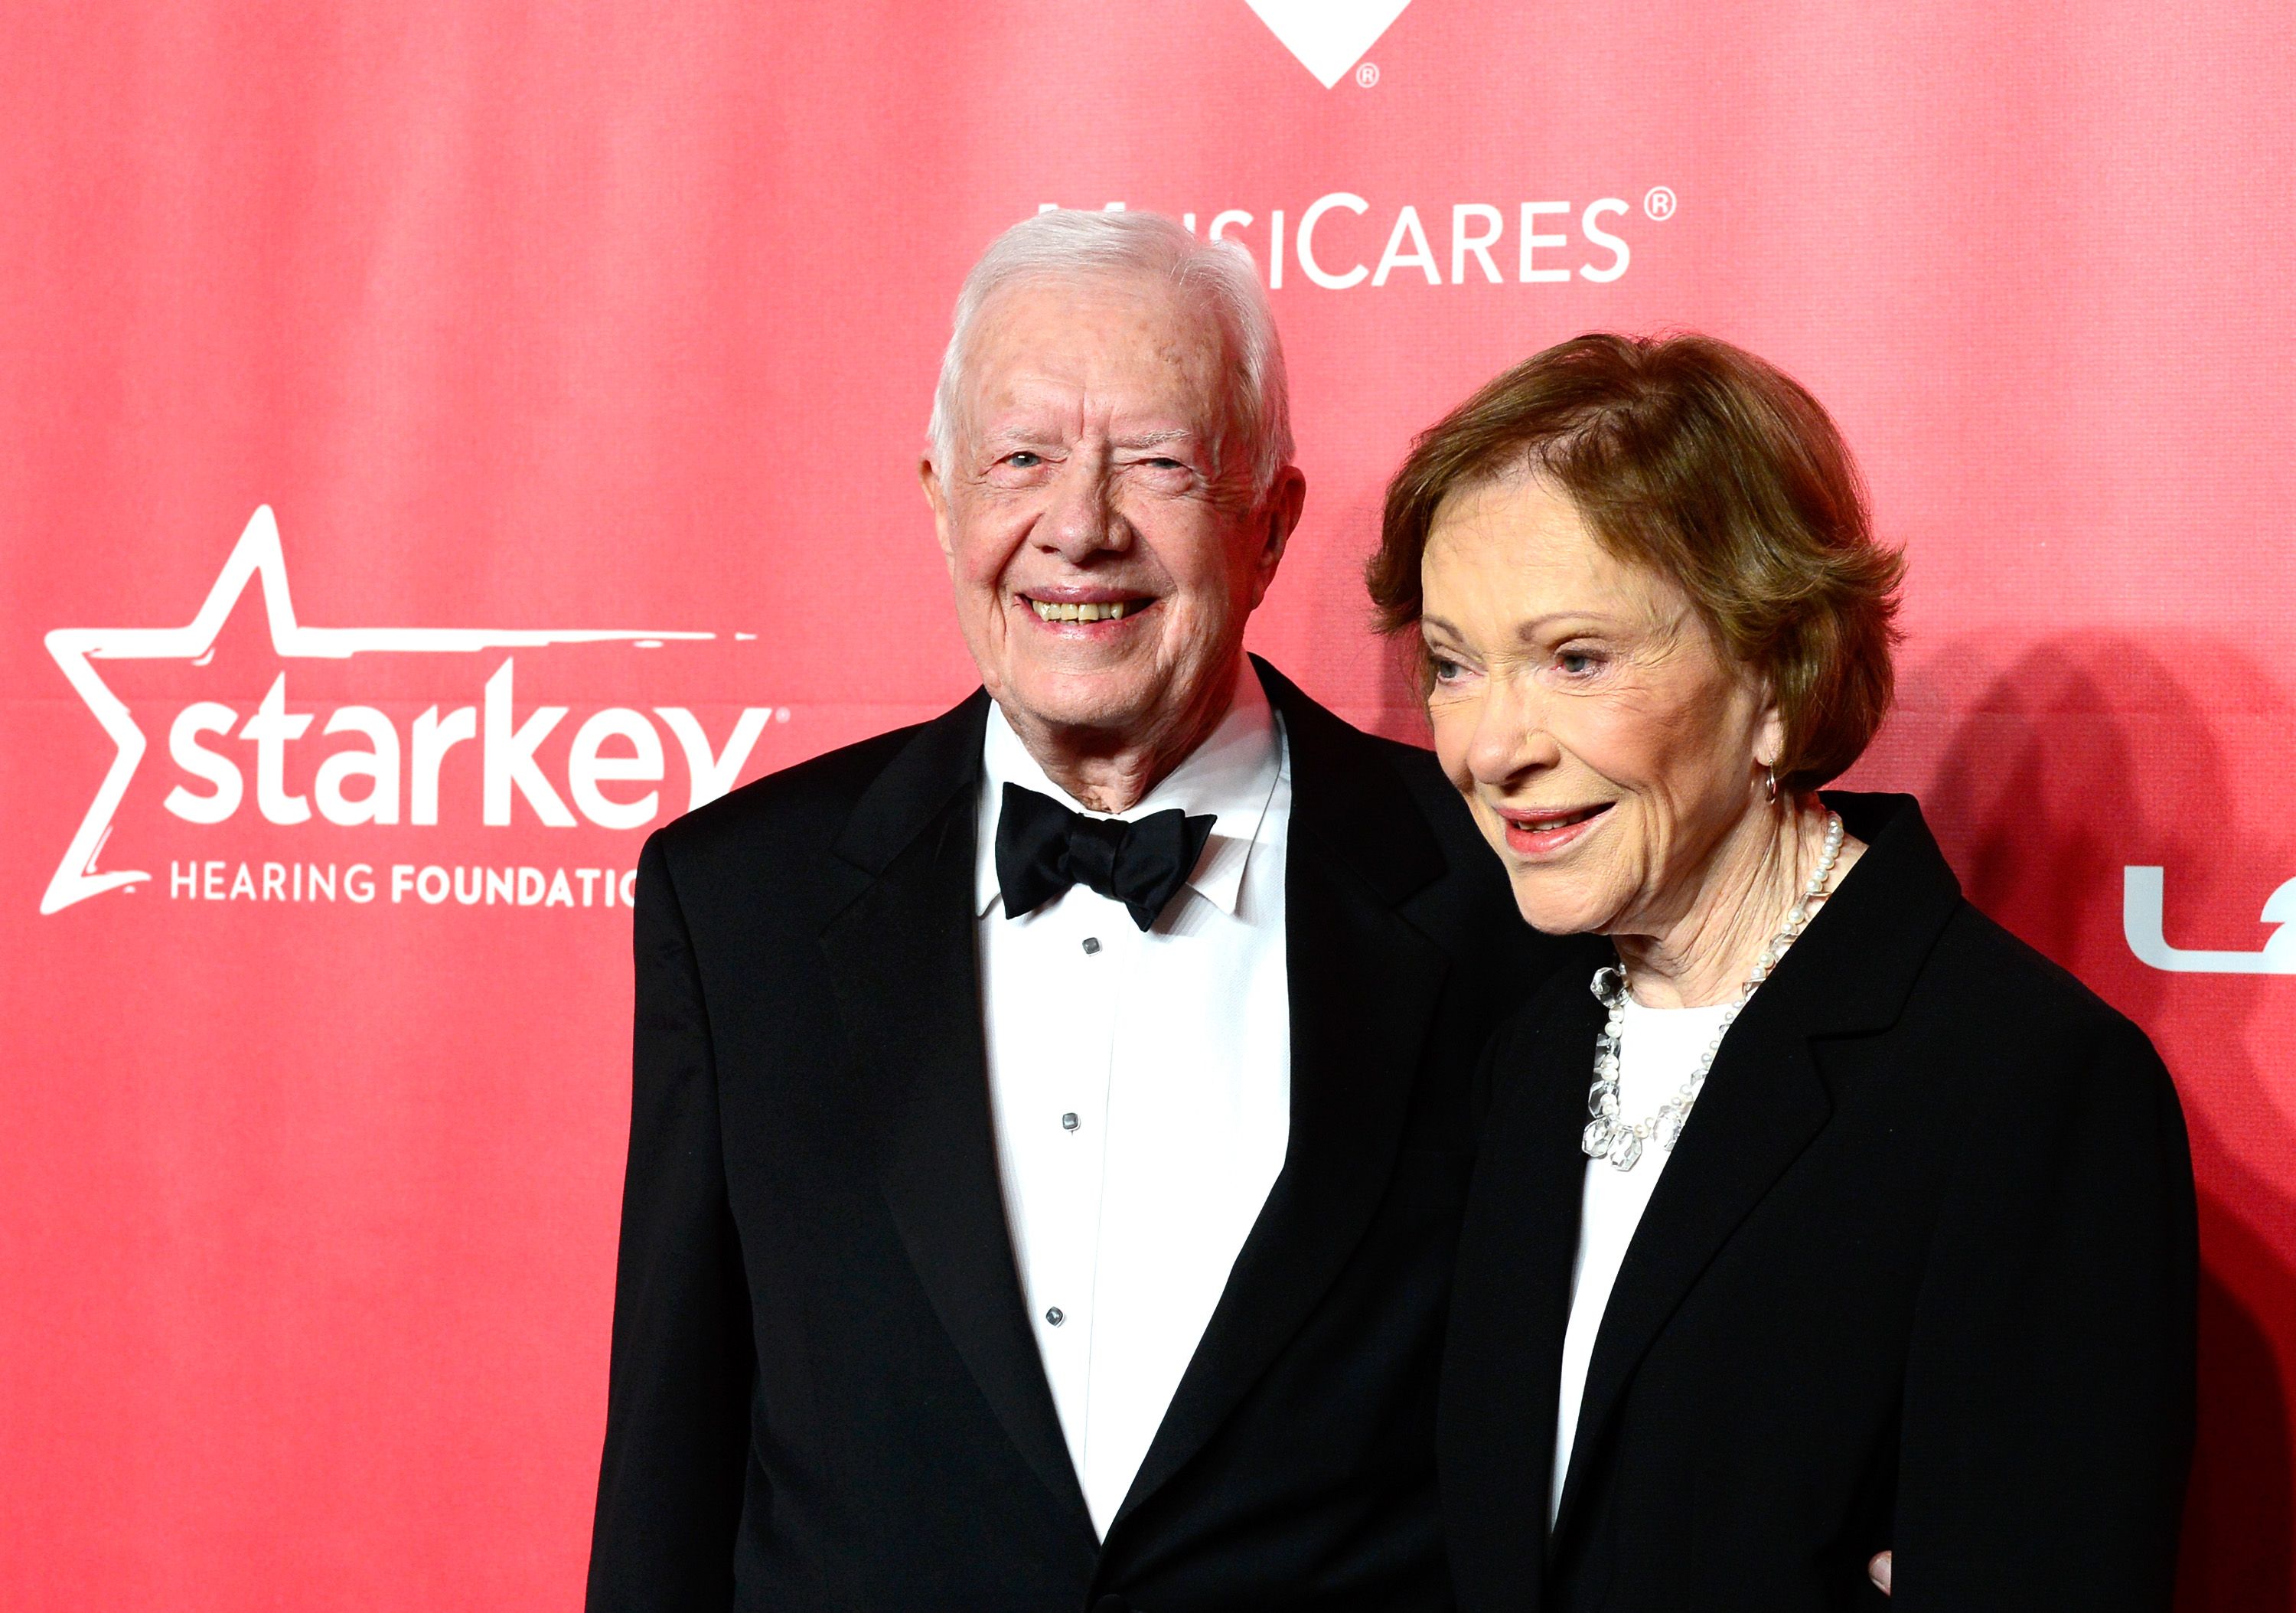 Former U.S. President Jimmy Carter and Rosalynn Carter at the 25th anniversary MusiCares Person Of The Year Gala at the Los Angeles Convention Center on February 6, 2015 | Photo: Getty Images